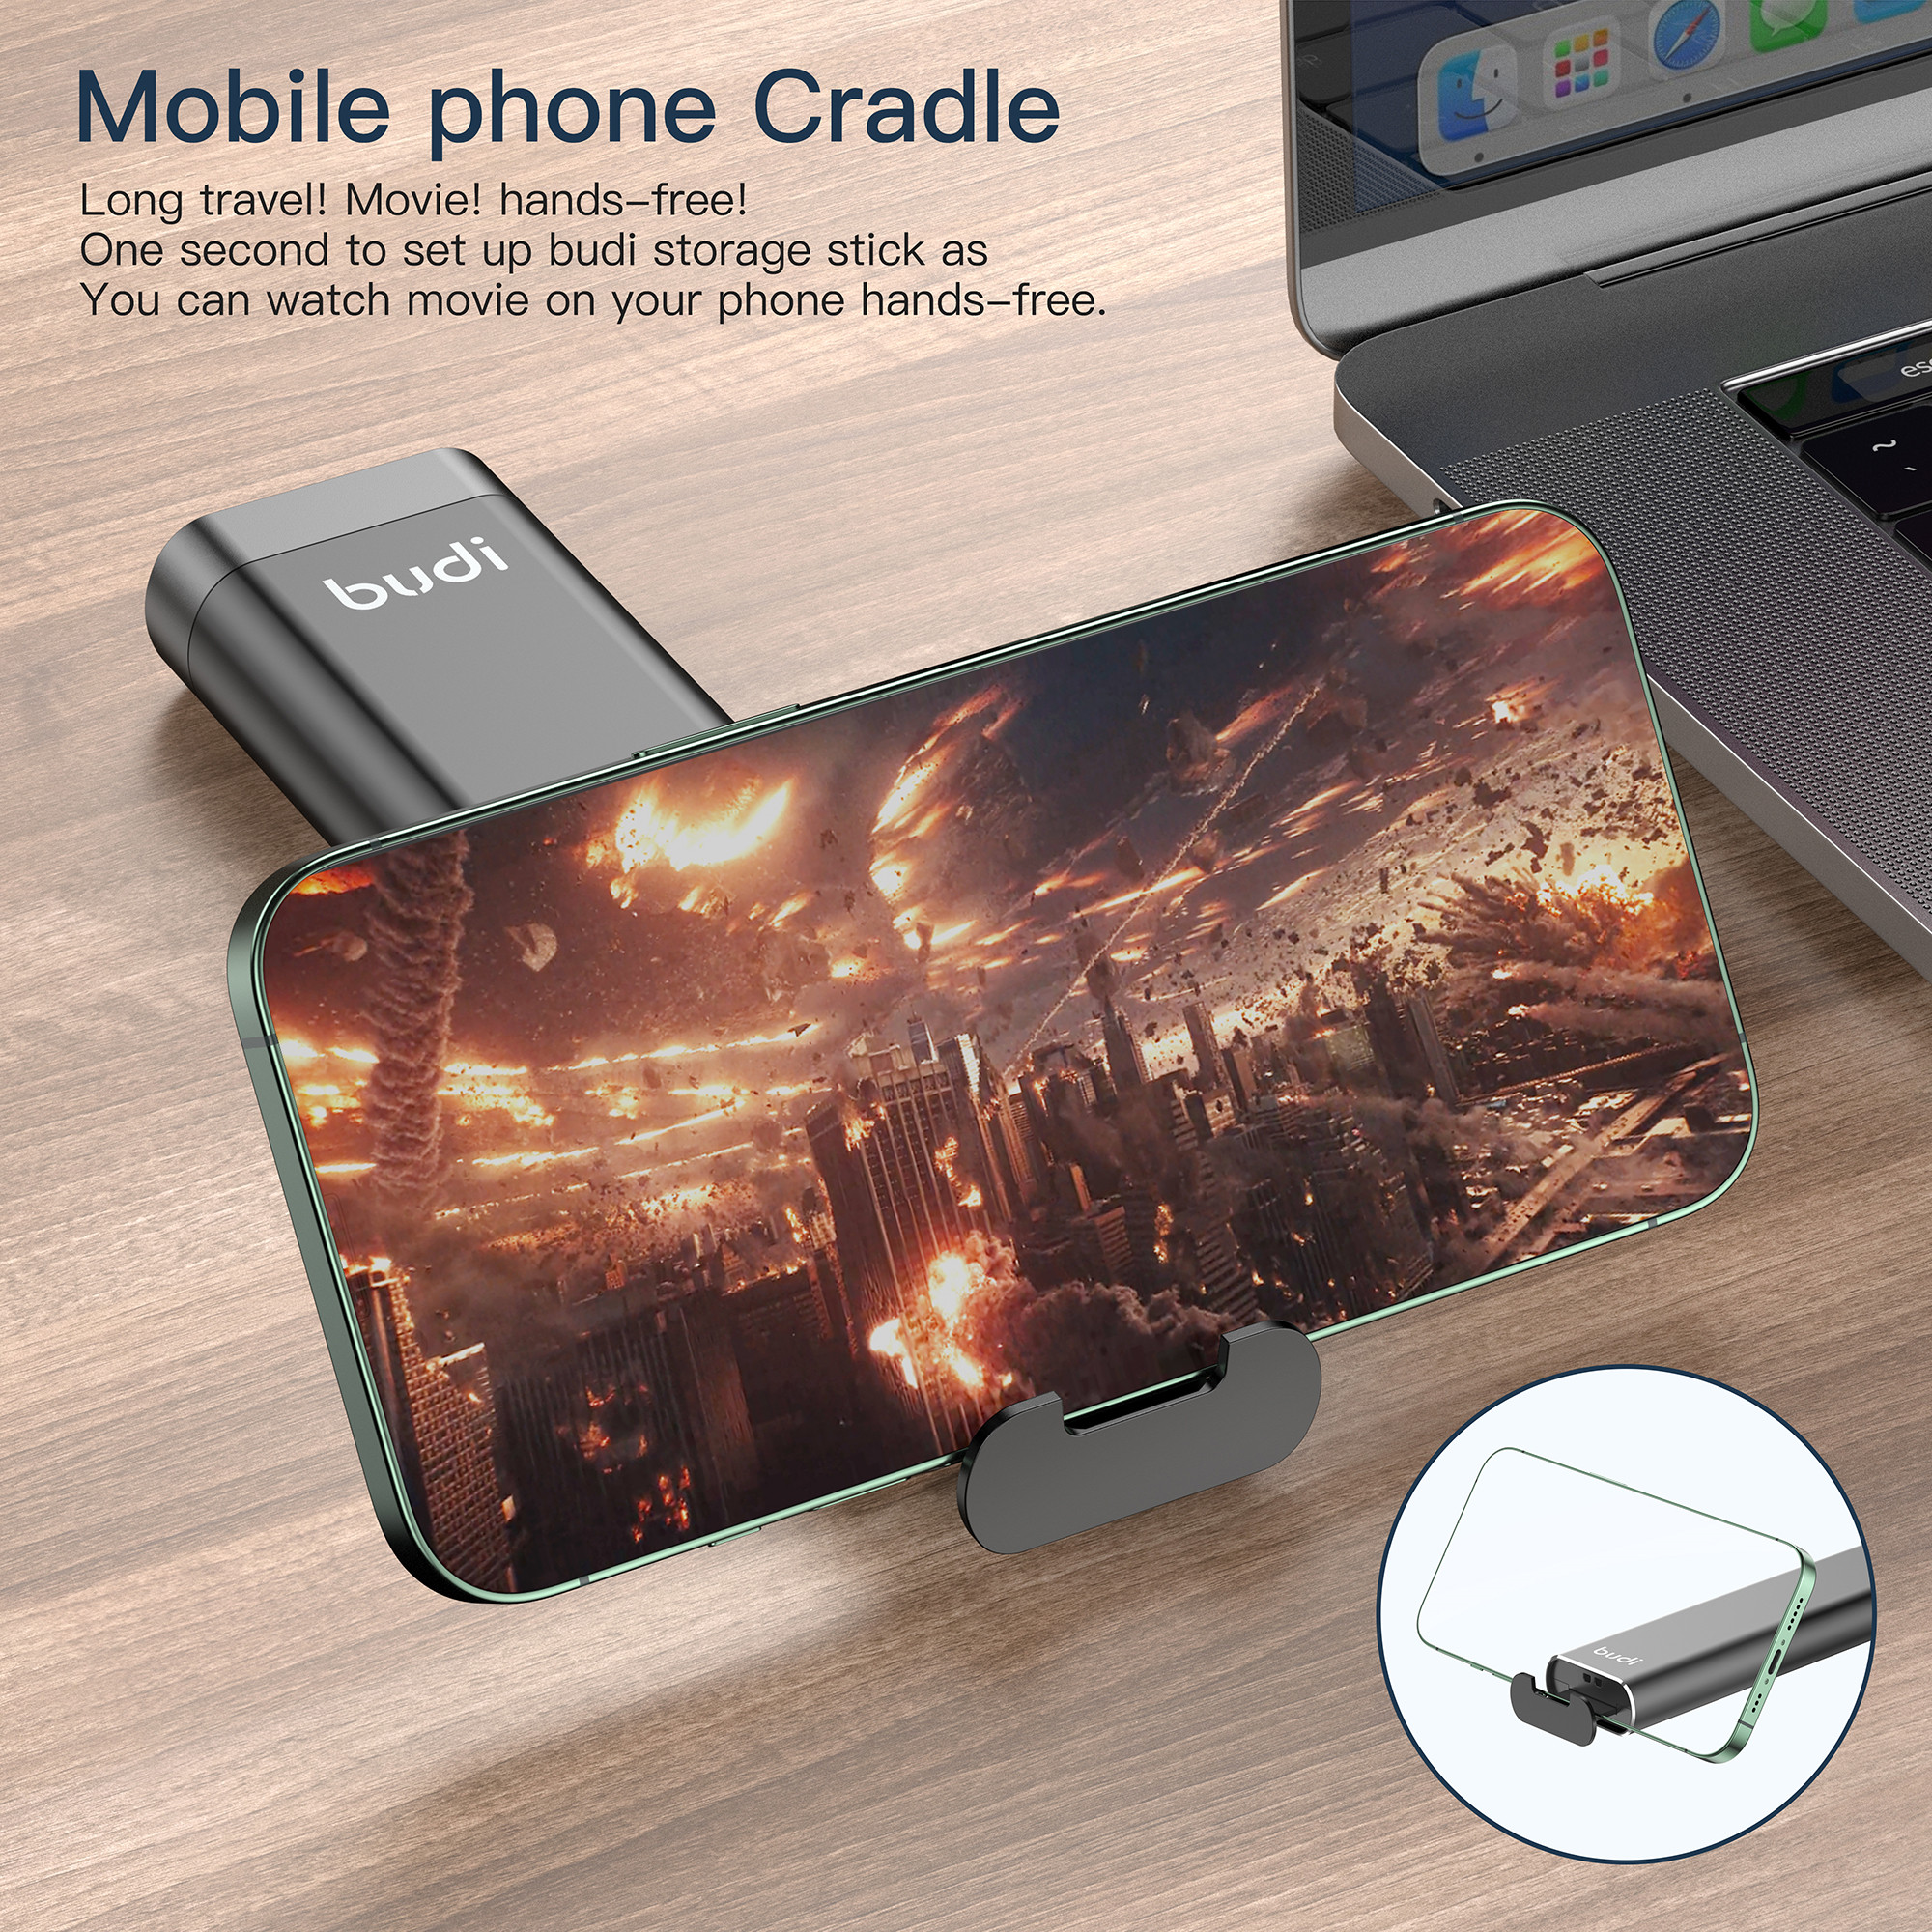 BUDI Multifunctional 9-in-1 SD Card Reader Cable and USB 3.0 Type-C Phone and External Camera and Computer Adapter with OTG Sync Charging and 5Gbps Transfer Memory Card High Speed Card Reader